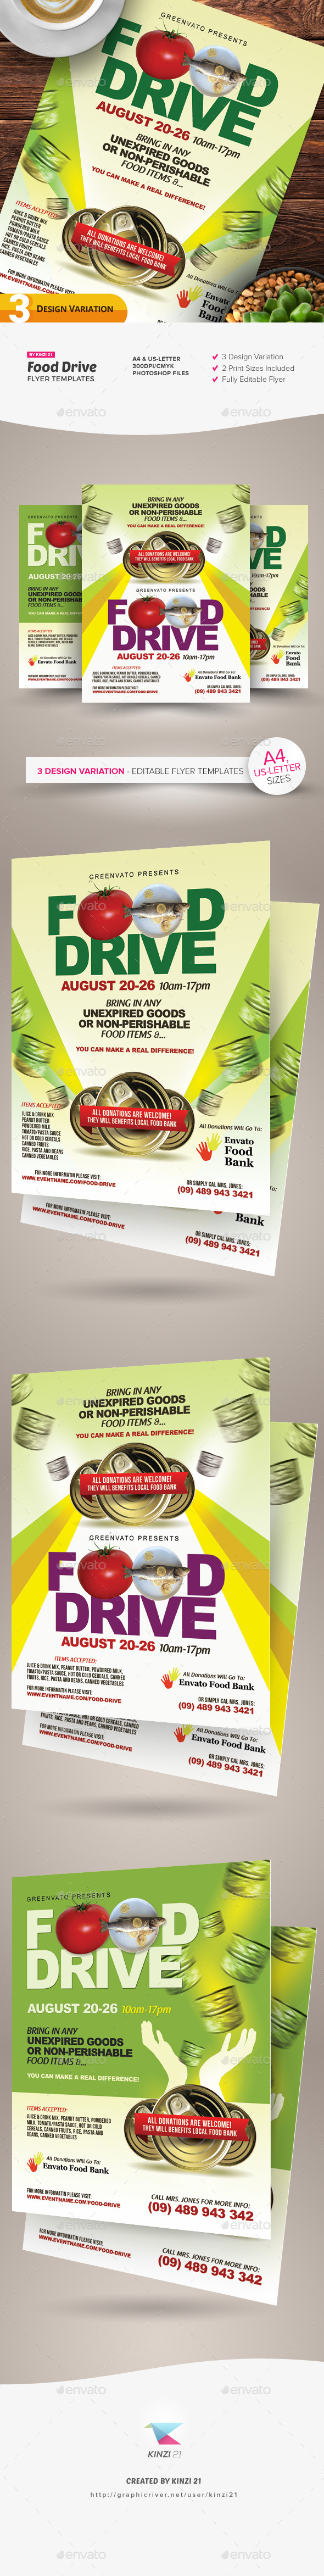 Food Drive Flyer Templates Pertaining To Canned Food Drive Flyer Template